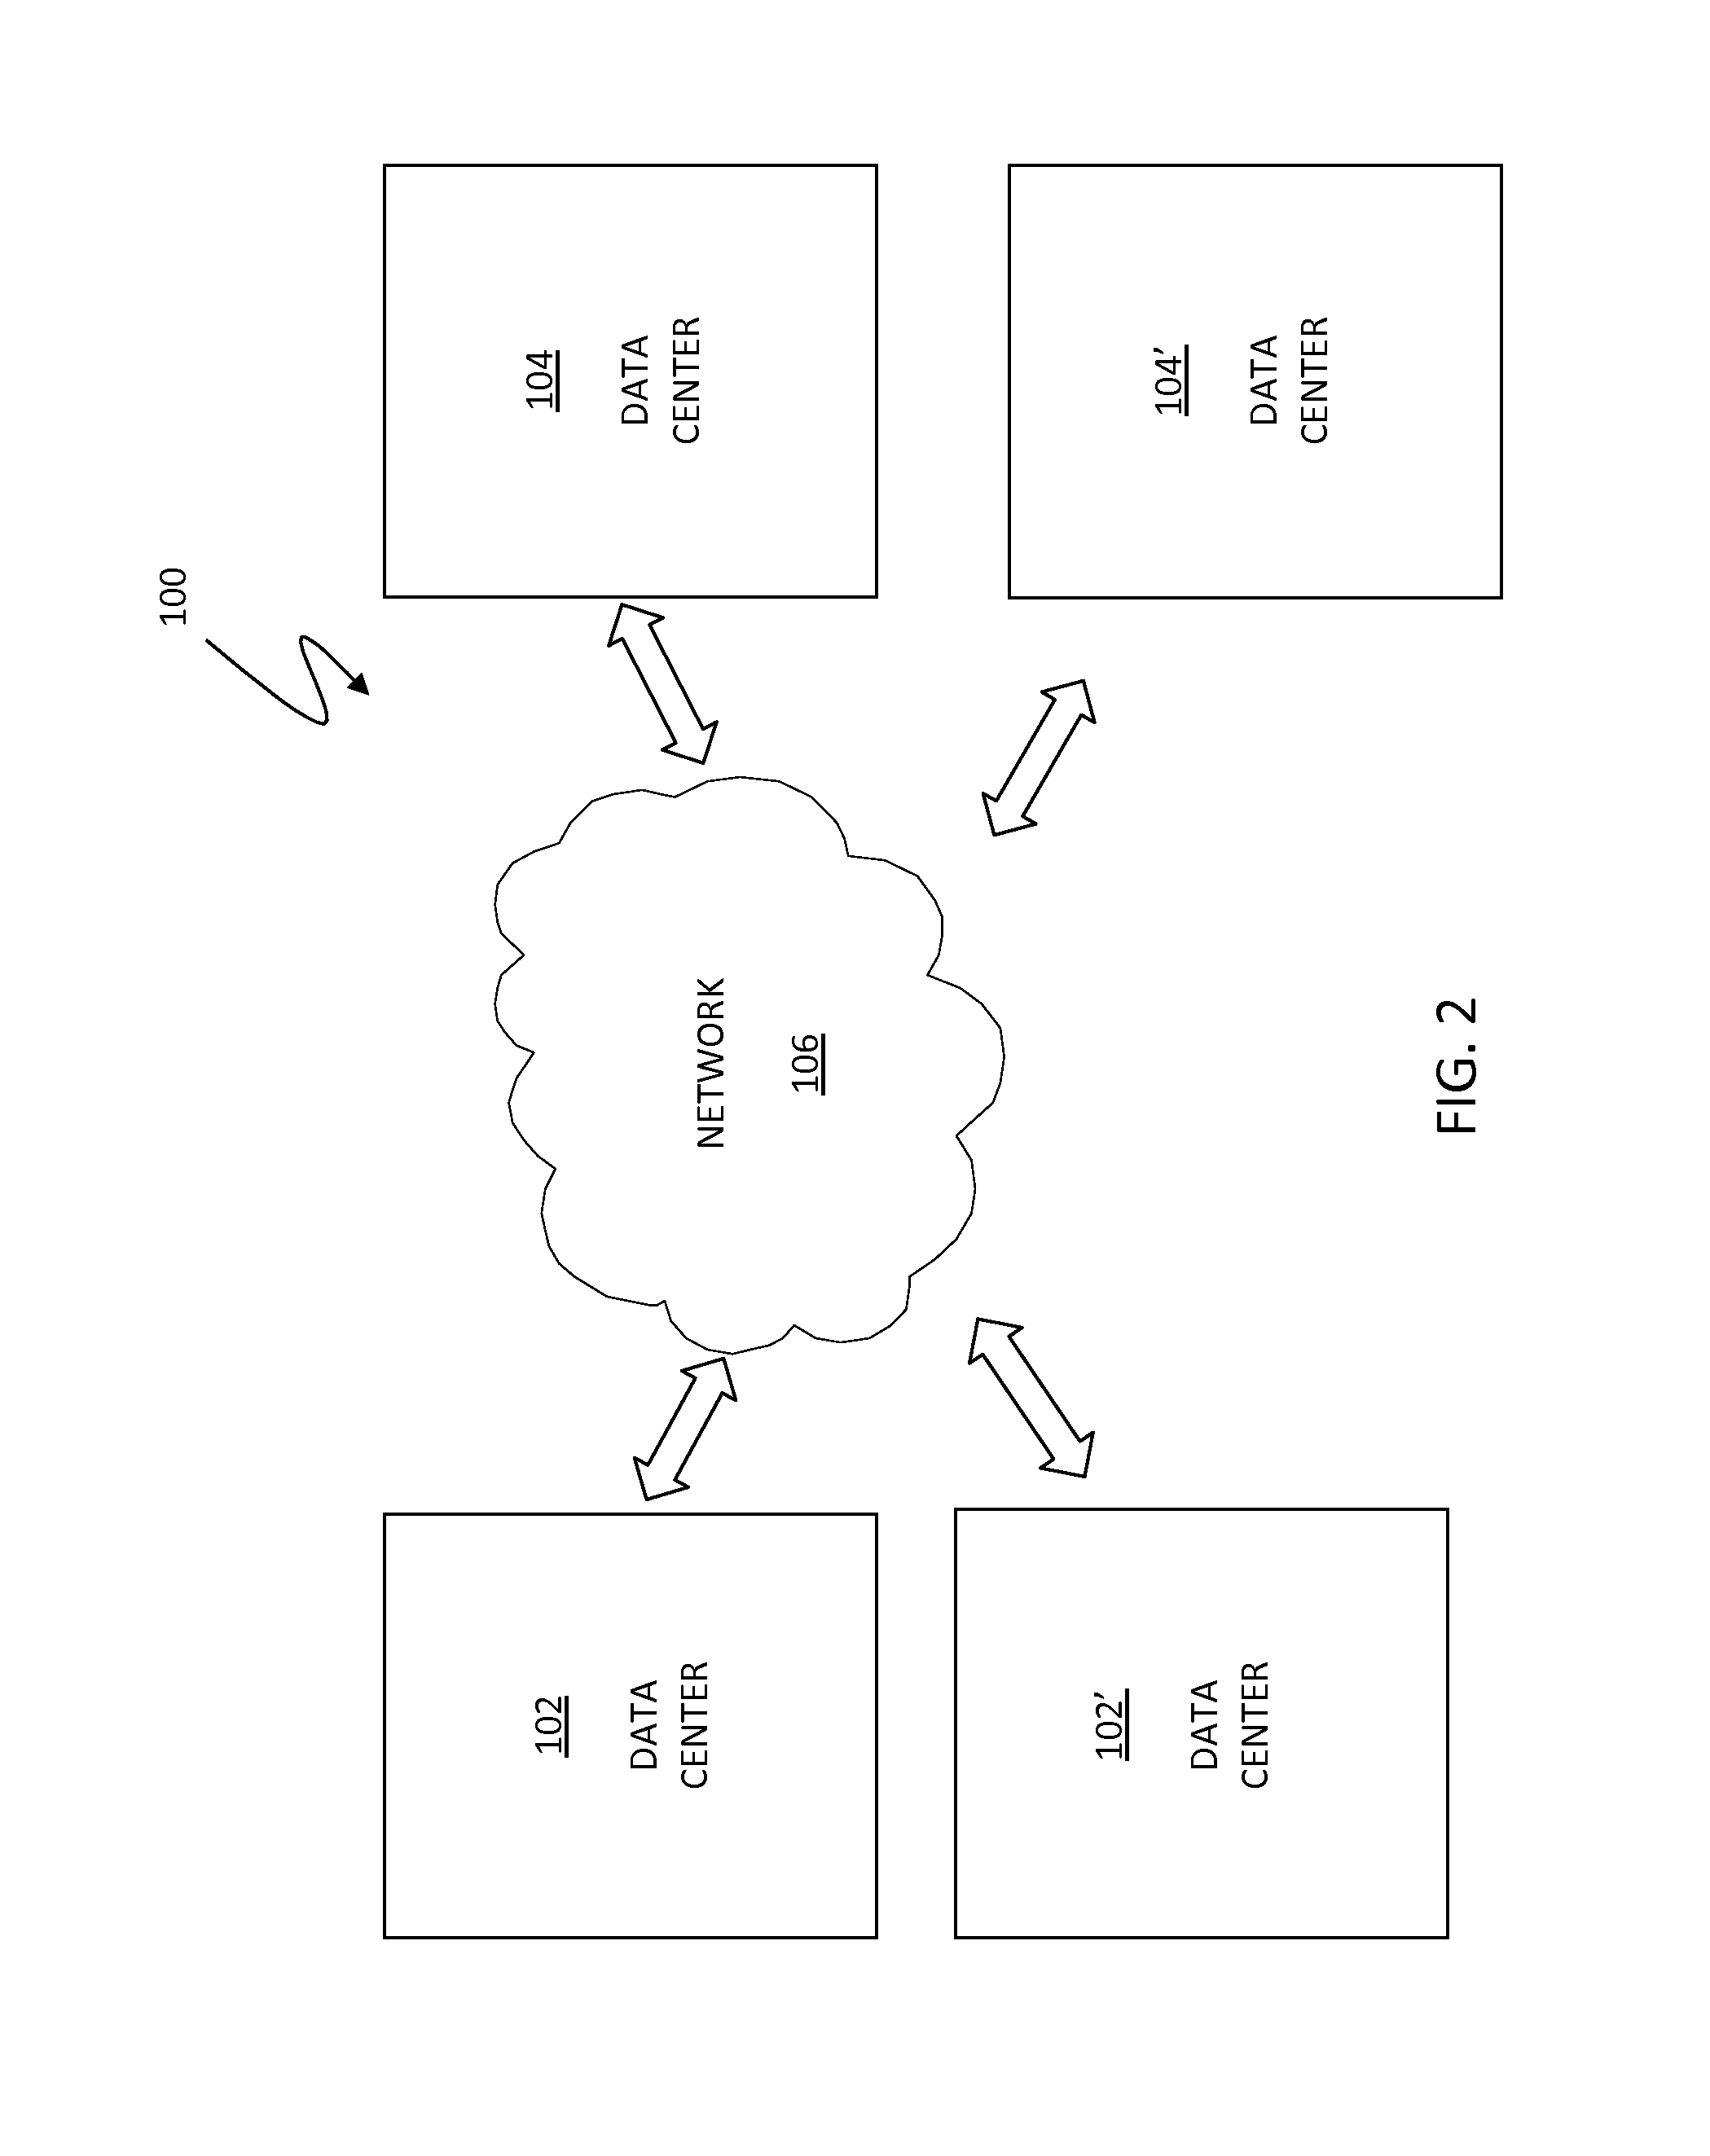 Distributed dynamic federation between multi-connected virtual platform clusters